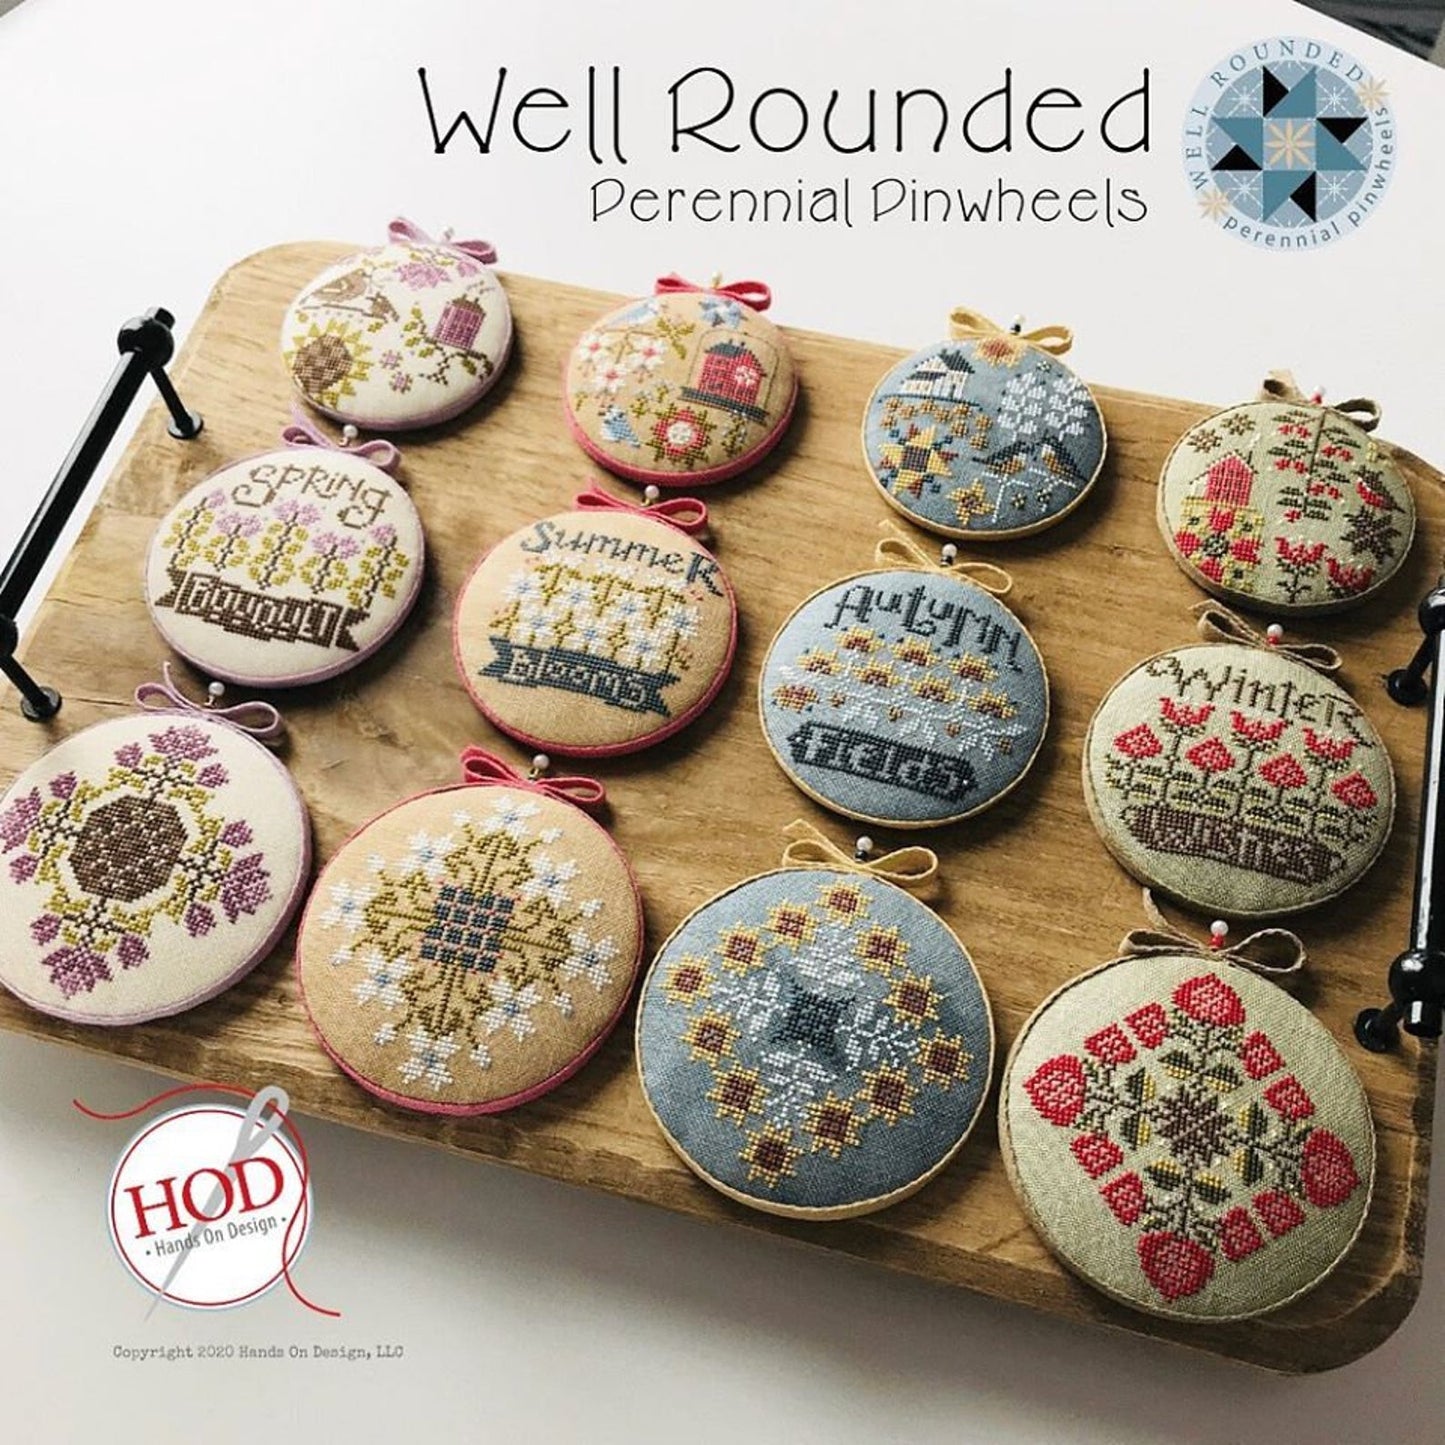 Hands on Design ~ Well Rounded - Perennial Pinwheels Pattern